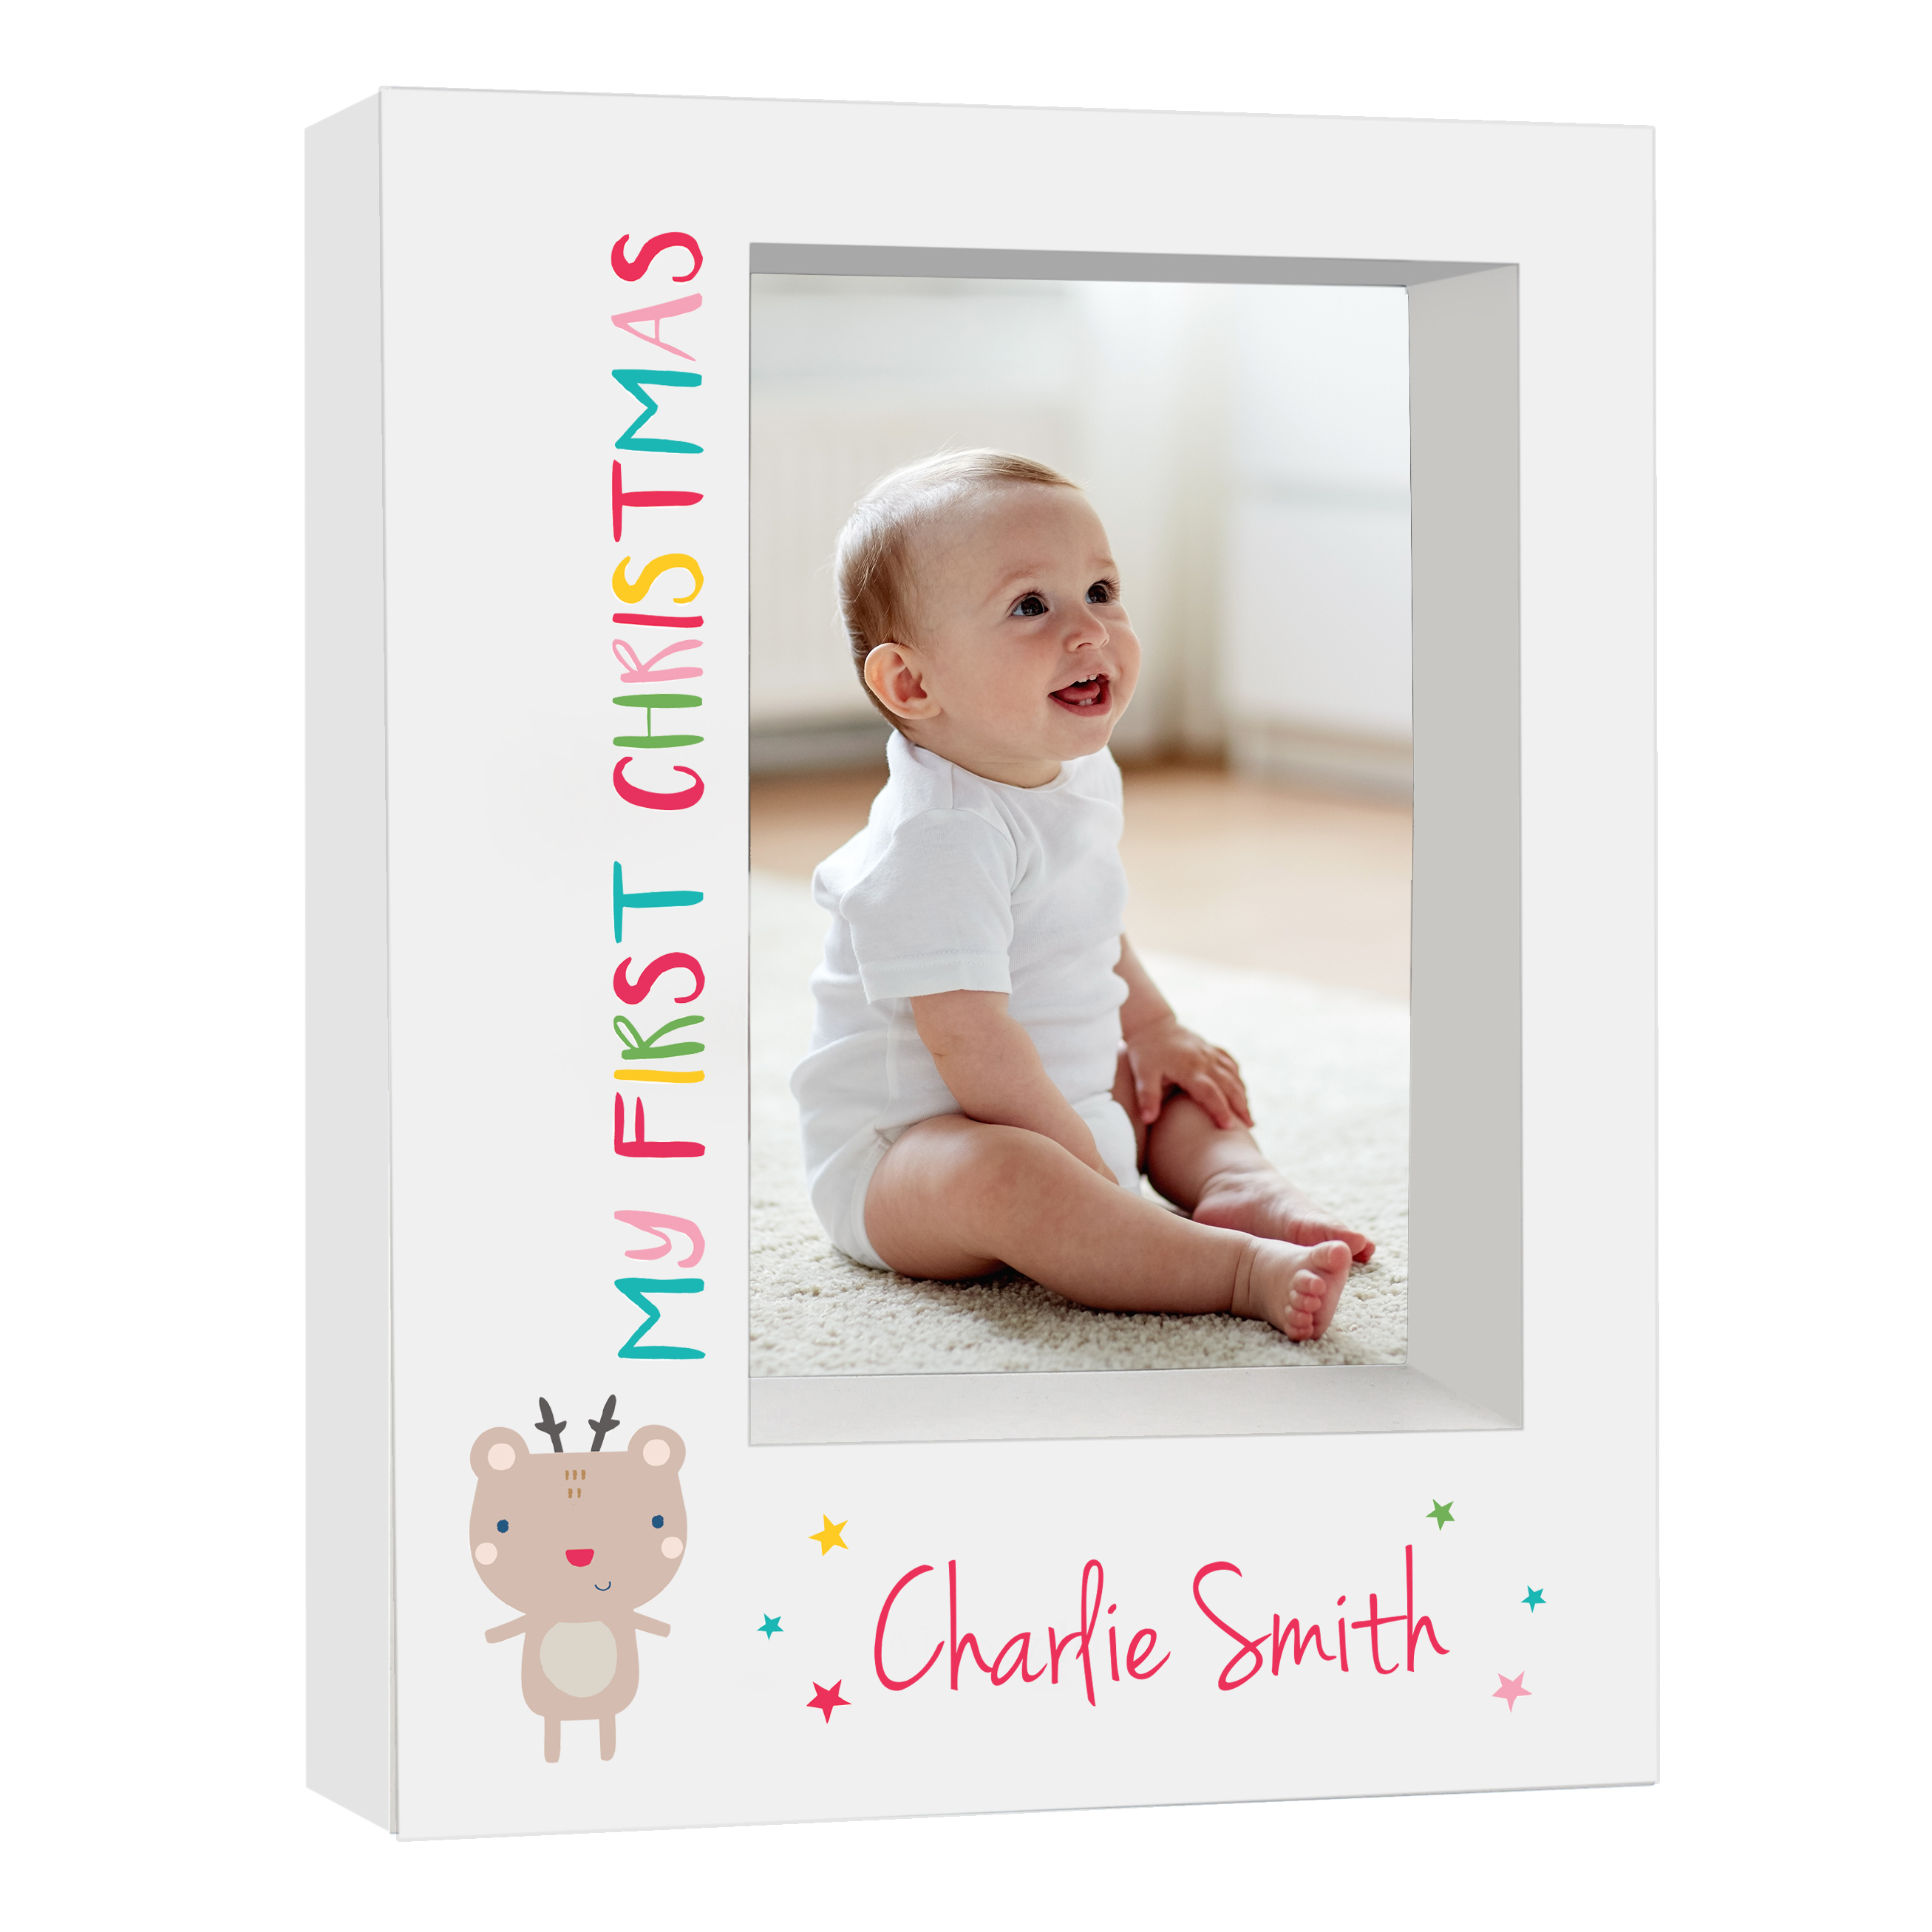 Personalised Baby Box Photo Frame - My First Christmas Reindeer